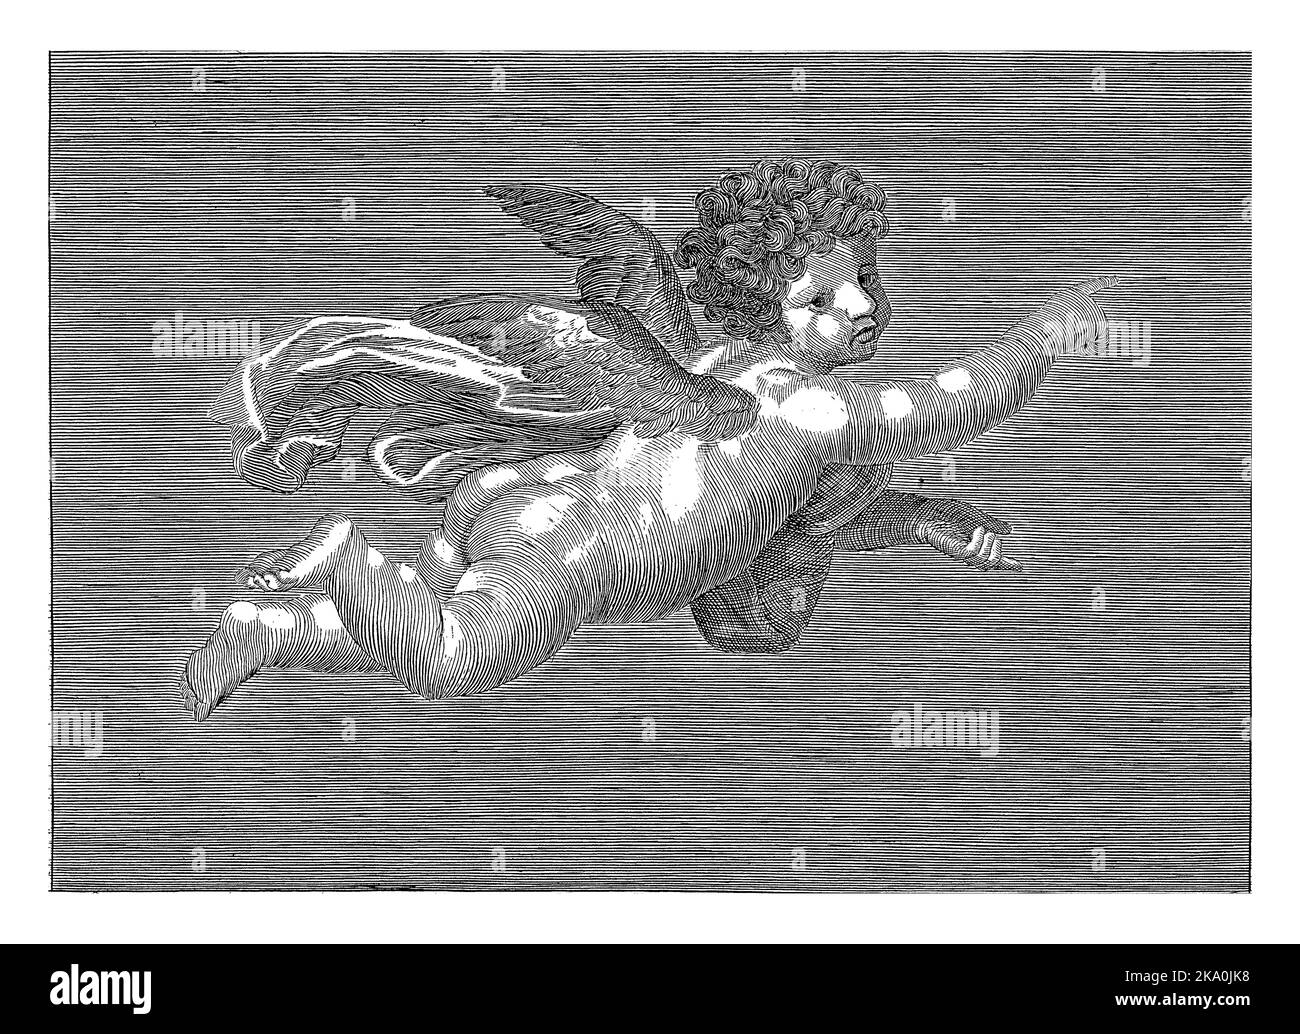 Pointing putto, Pieter Romans, 1825 - 1835, vintage engraved. Stock Photo